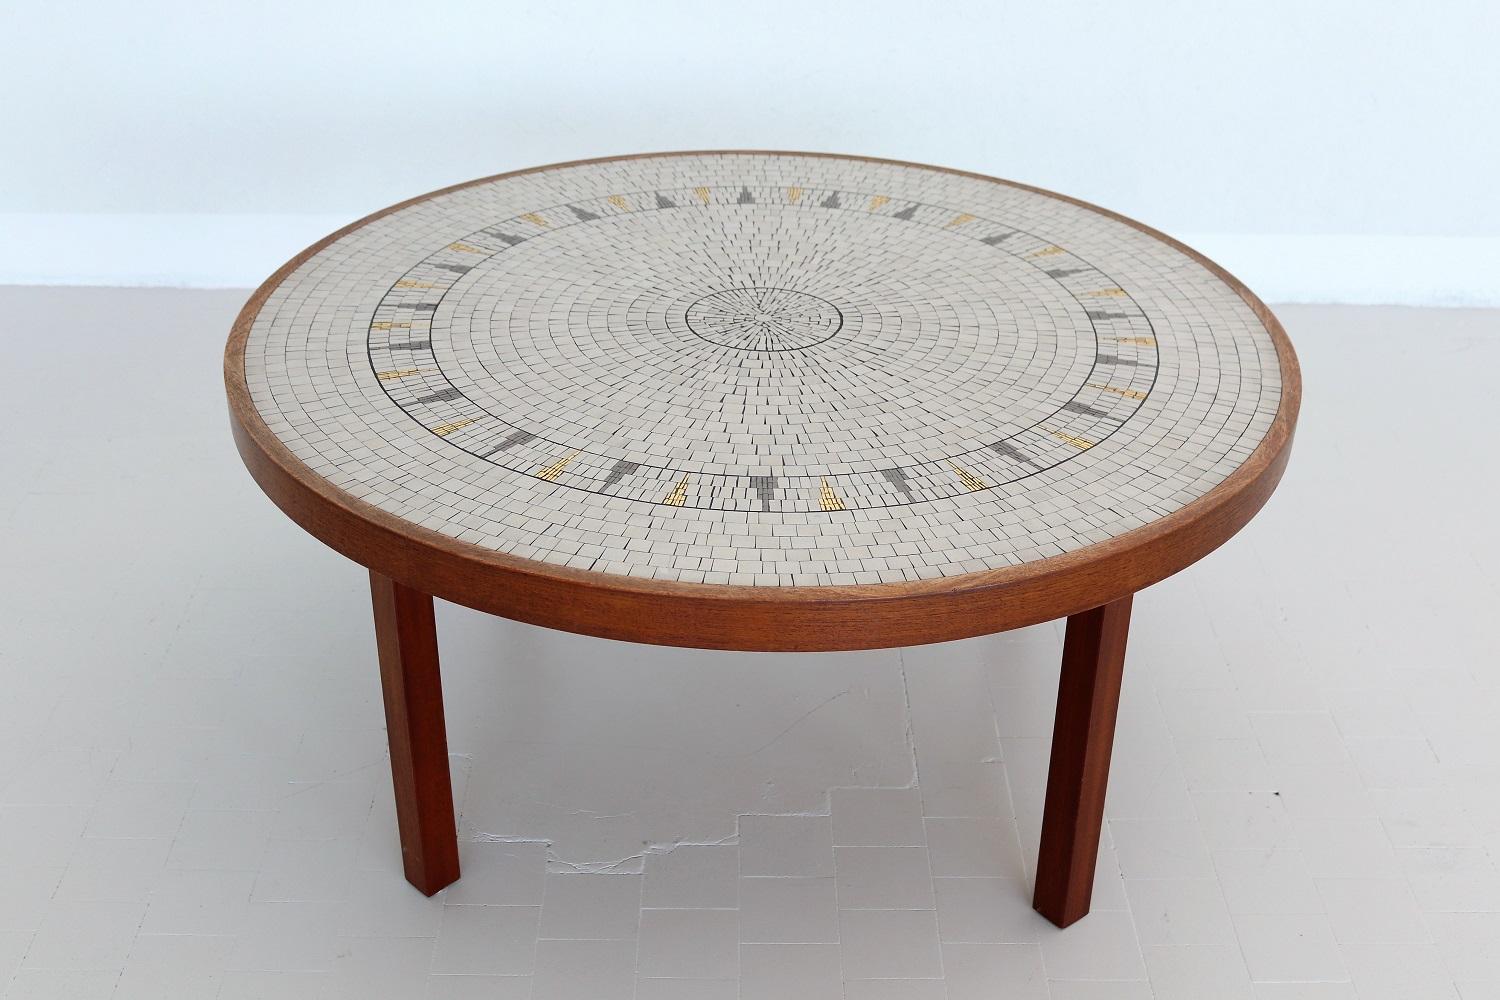 German Midcentury Mosaic and Teak Sofa Table or Coffee Table by Berthold Muller, 1960s